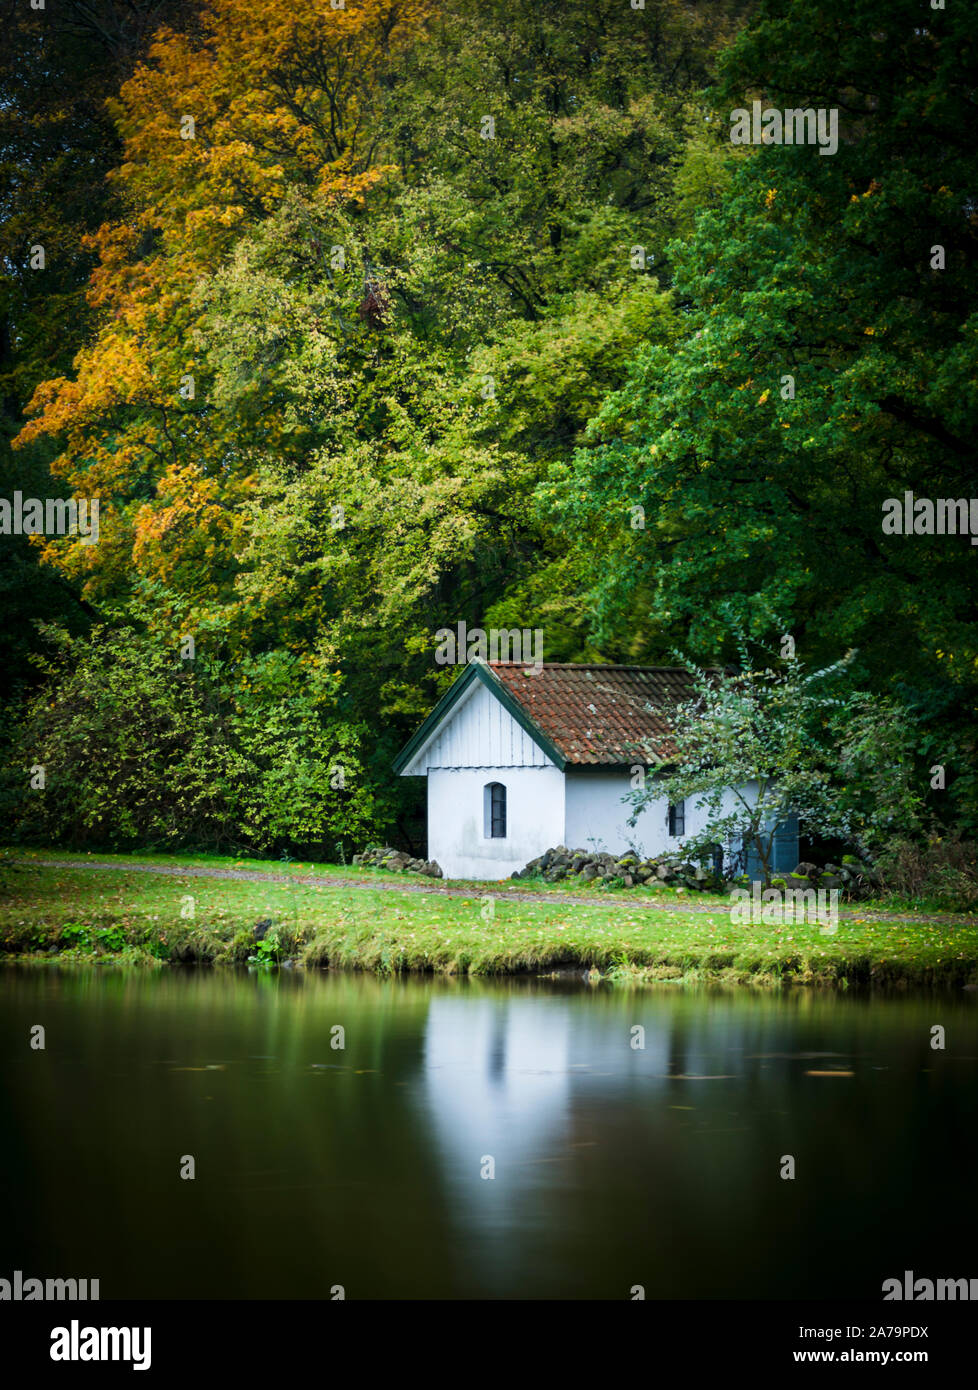 A small house in a lake front with reflection. Stock Photo